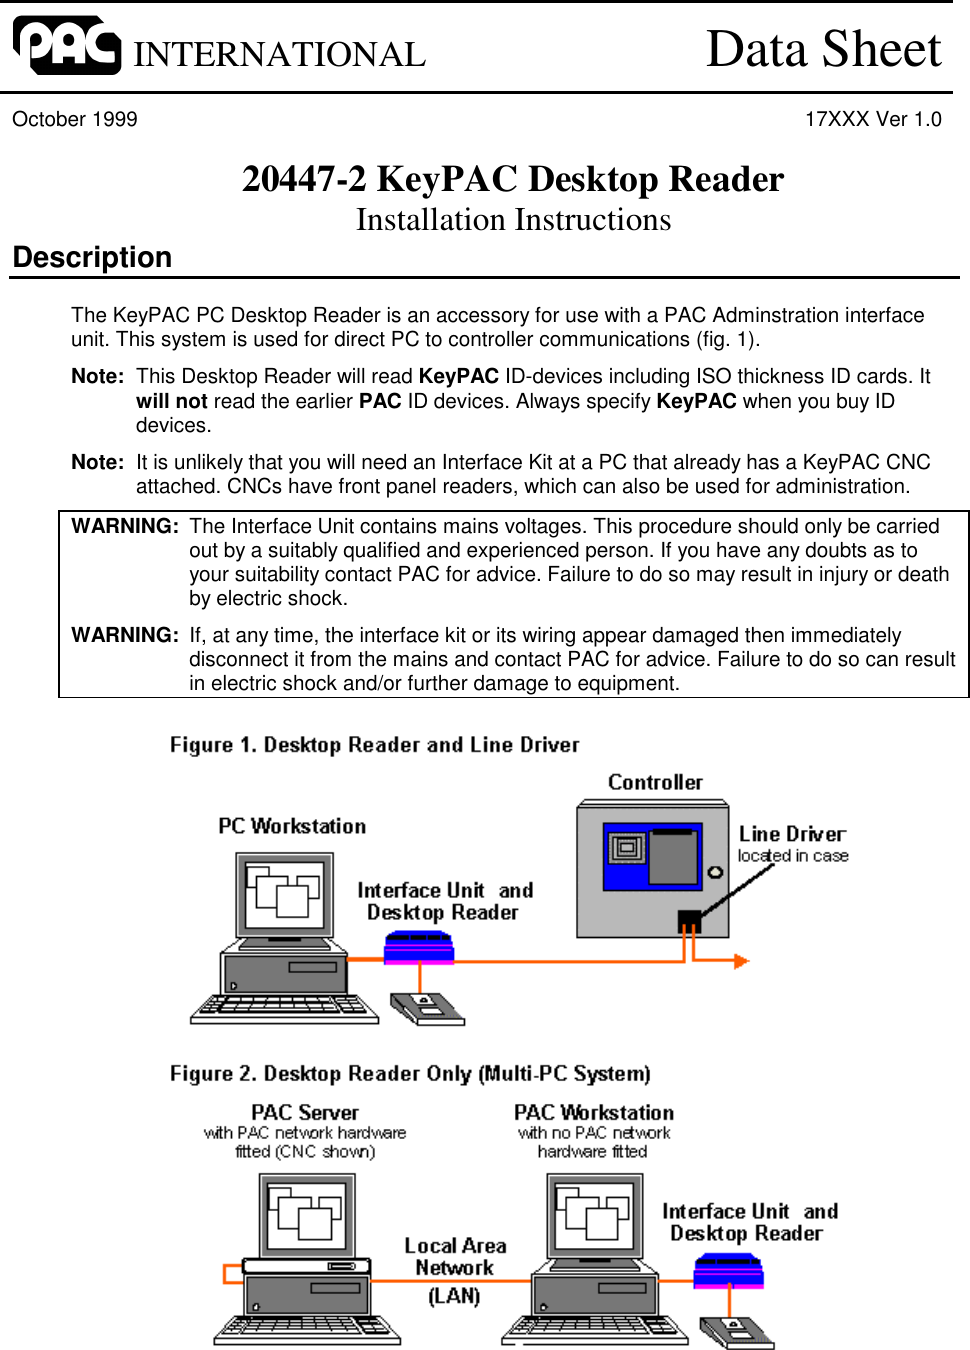 INTERNATIONAL Data SheetOctober 1999 17XXX Ver 1.020447-2 KeyPAC Desktop ReaderInstallation InstructionsDescriptionThe KeyPAC PC Desktop Reader is an accessory for use with a PAC Adminstration interfaceunit. This system is used for direct PC to controller communications (fig. 1).Note:  This Desktop Reader will read KeyPAC ID-devices including ISO thickness ID cards. Itwill not read the earlier PAC ID devices. Always specify KeyPAC when you buy IDdevices.Note:  It is unlikely that you will need an Interface Kit at a PC that already has a KeyPAC CNCattached. CNCs have front panel readers, which can also be used for administration.WARNING: The Interface Unit contains mains voltages. This procedure should only be carriedout by a suitably qualified and experienced person. If you have any doubts as toyour suitability contact PAC for advice. Failure to do so may result in injury or deathby electric shock.WARNING: If, at any time, the interface kit or its wiring appear damaged then immediatelydisconnect it from the mains and contact PAC for advice. Failure to do so can resultin electric shock and/or further damage to equipment.